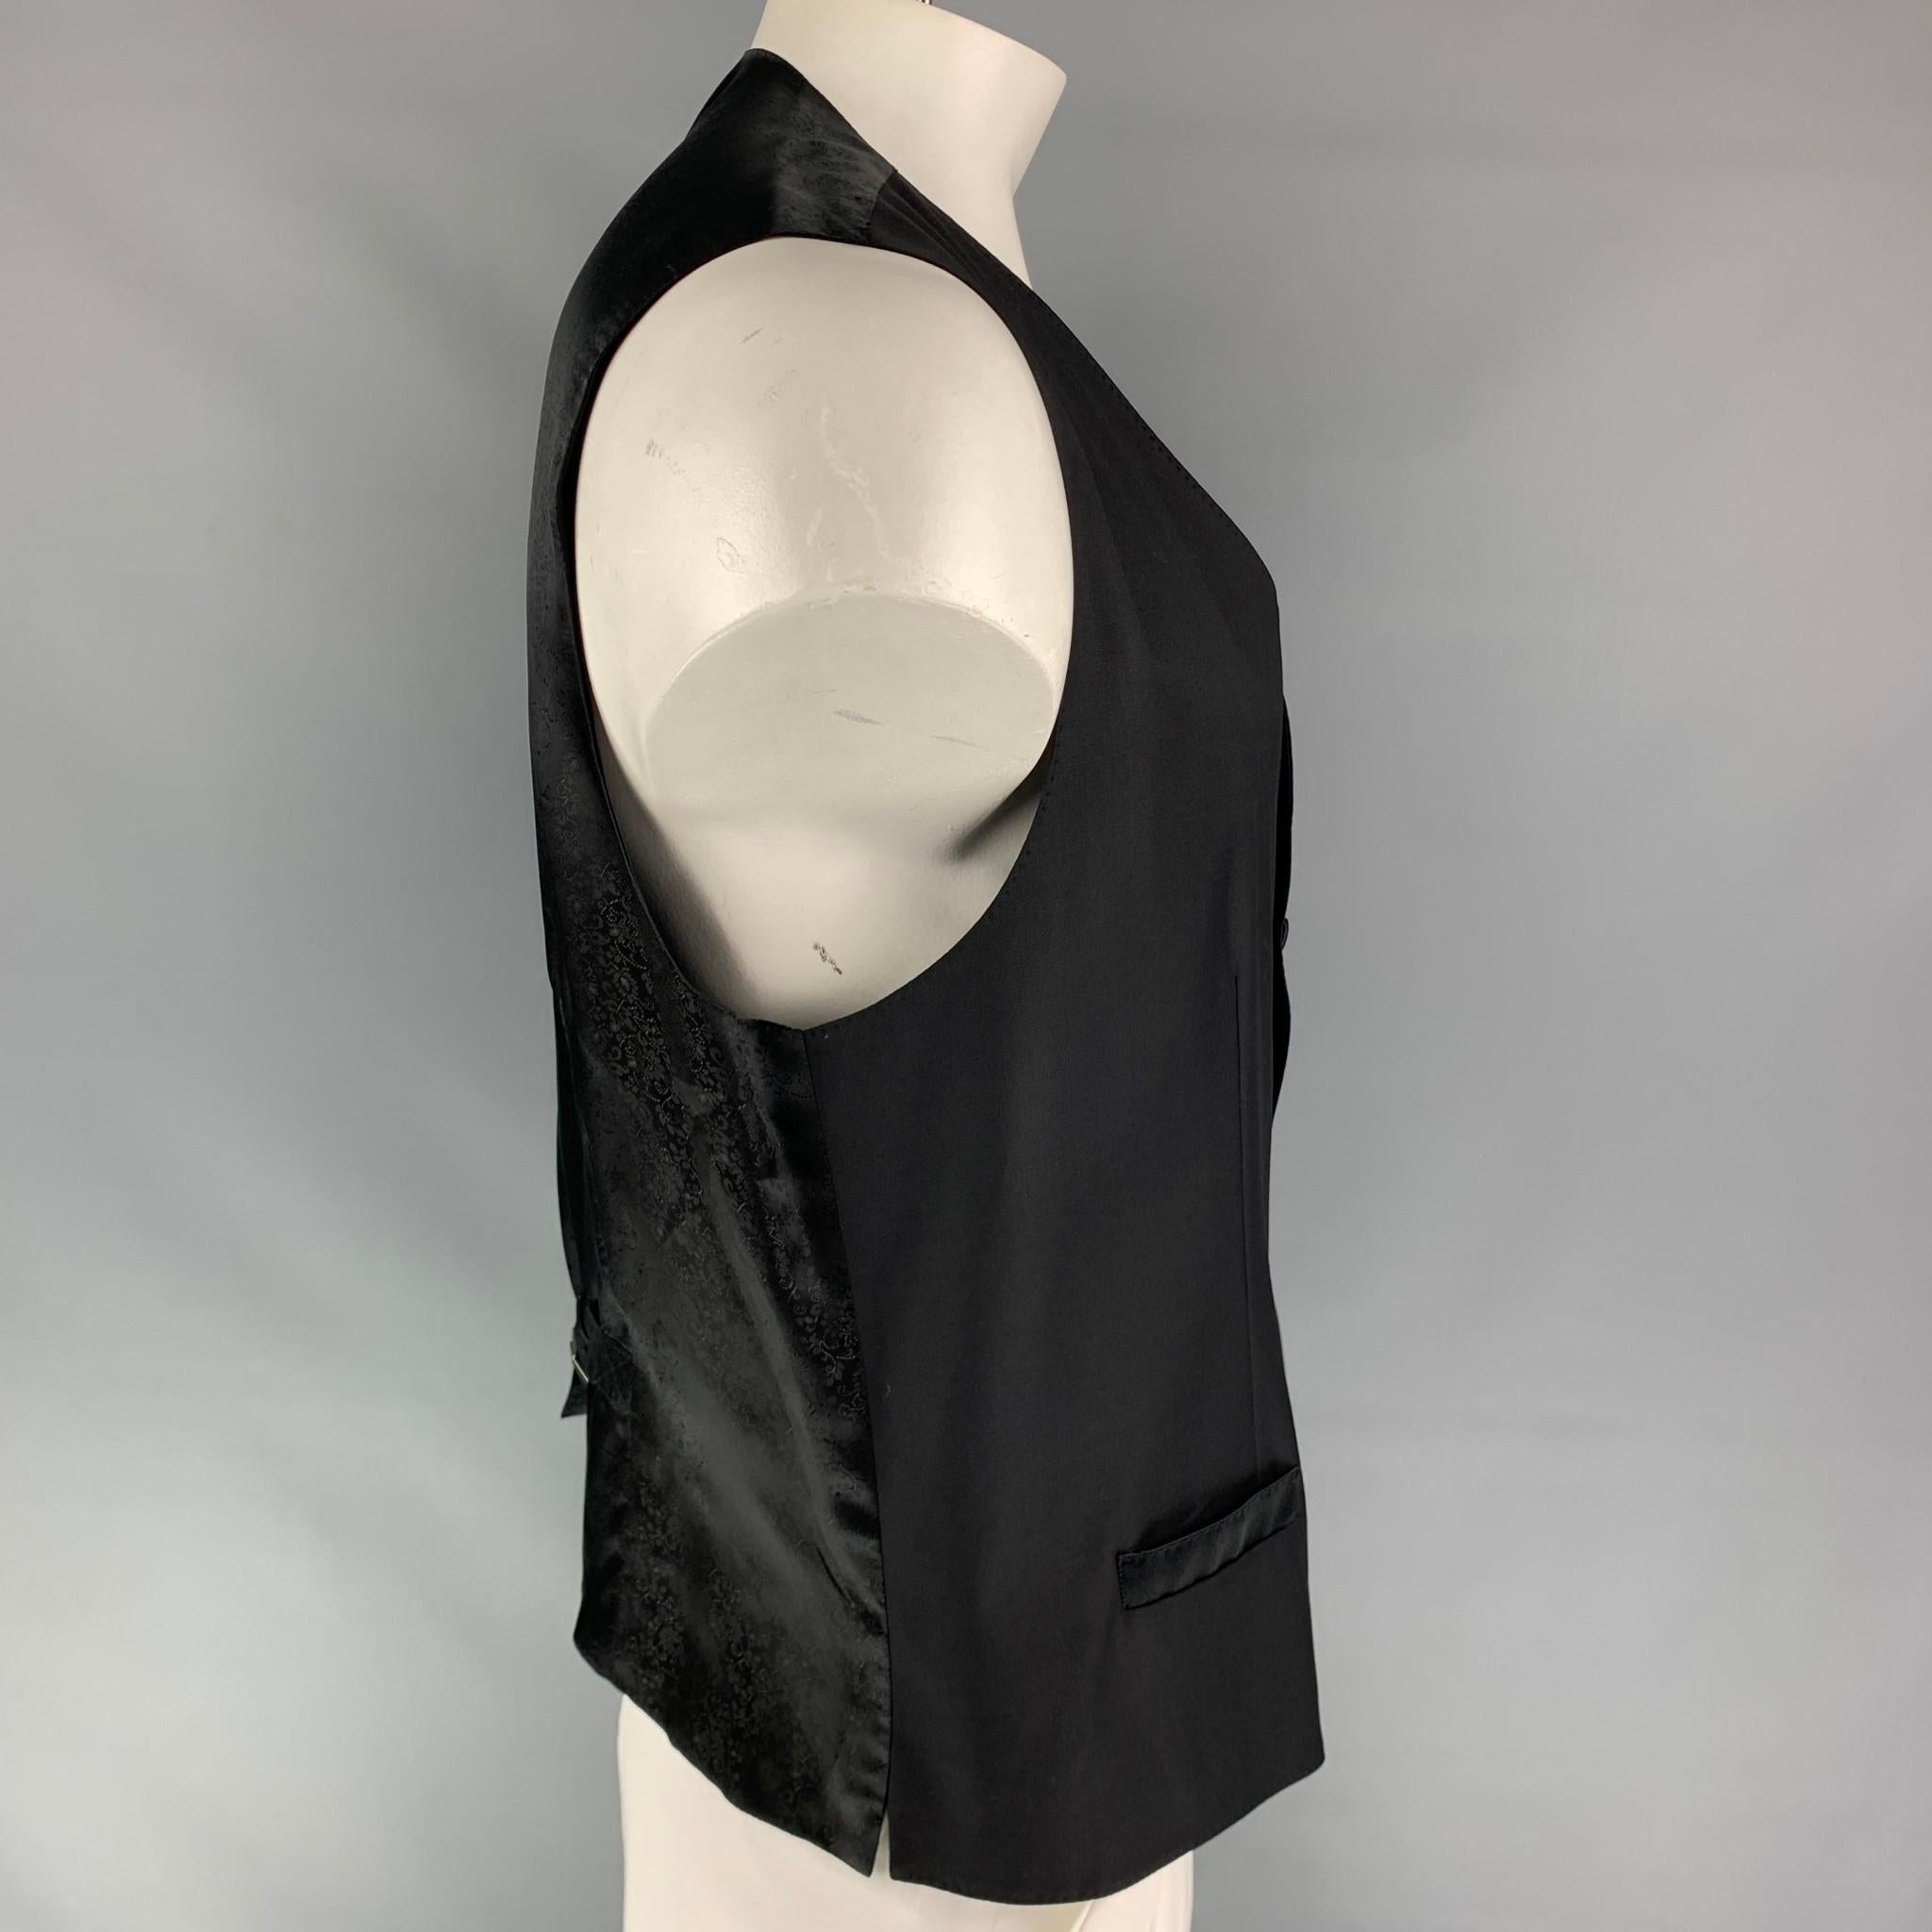 DOLCE & GABBANA vest comes in black wool blend featuring a classic style, back belt, slit pockets, and a buttoned closure. Made in Italy.

Very Good Pre-Owned Condition.
Marked: 58

Measurements:

Shoulder: 16 in.
Chest: 44 in.
Length: 25 in. 

SKU: